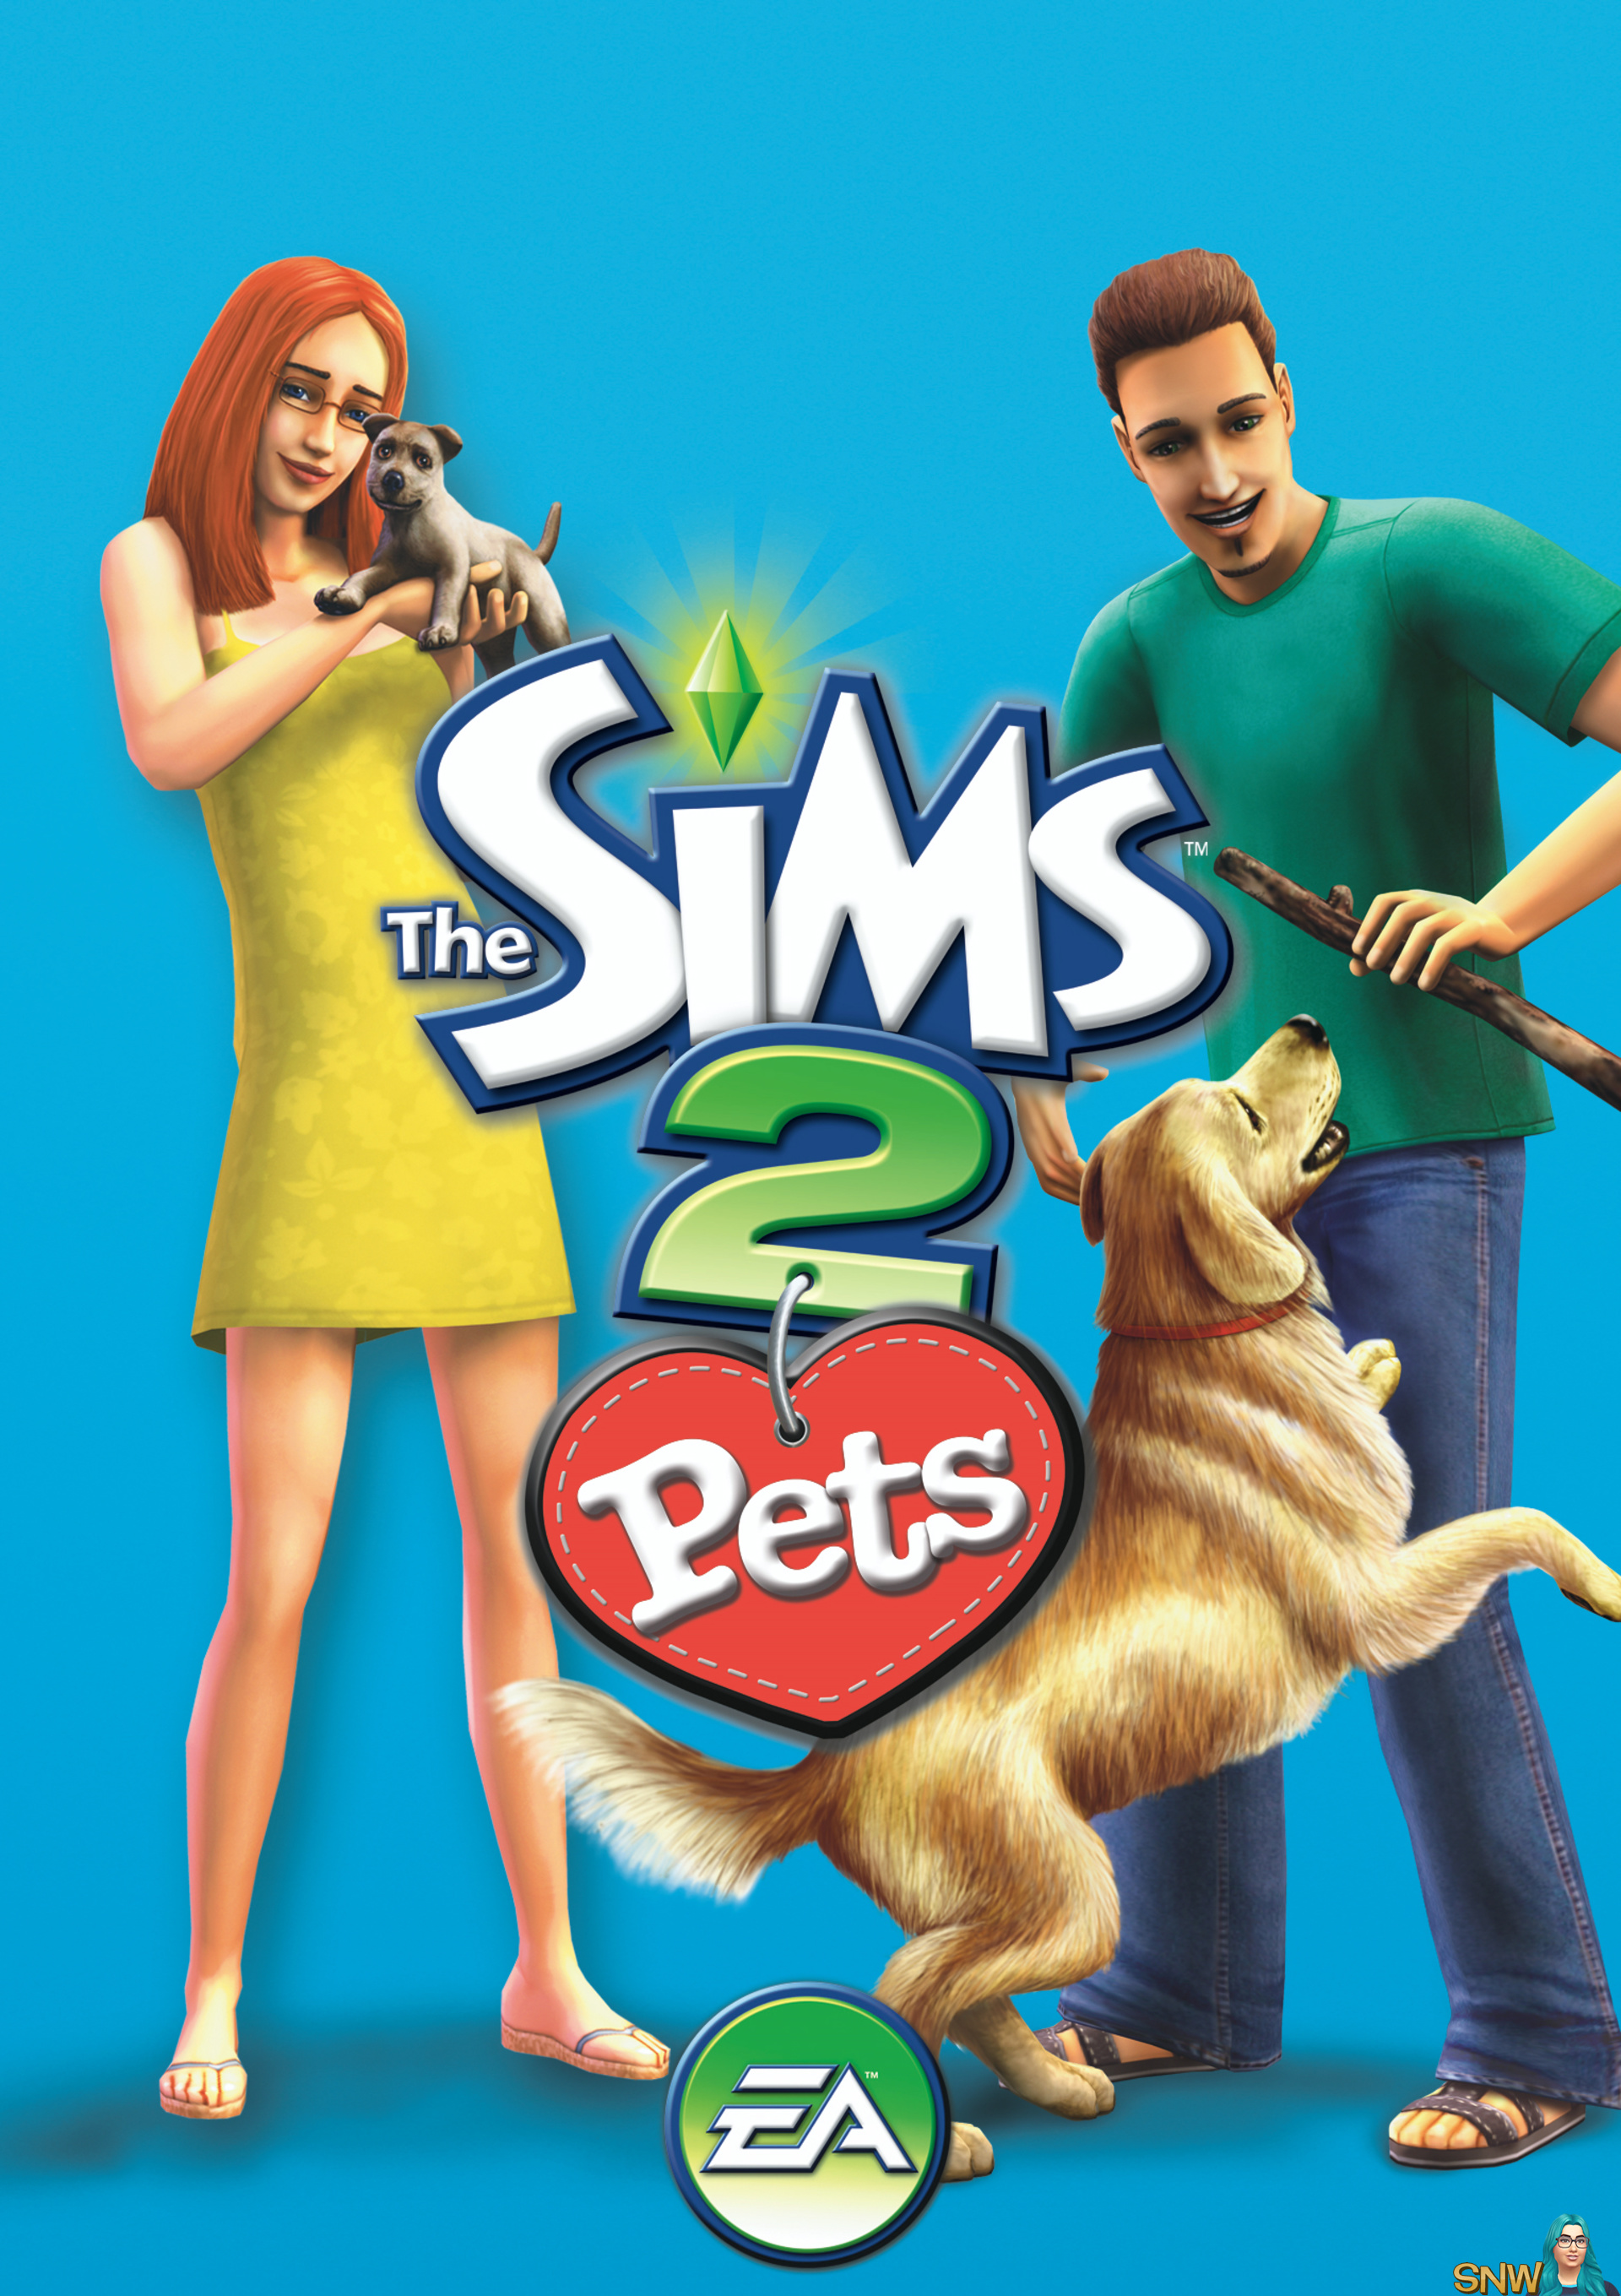 The sims 2 pets job promotions